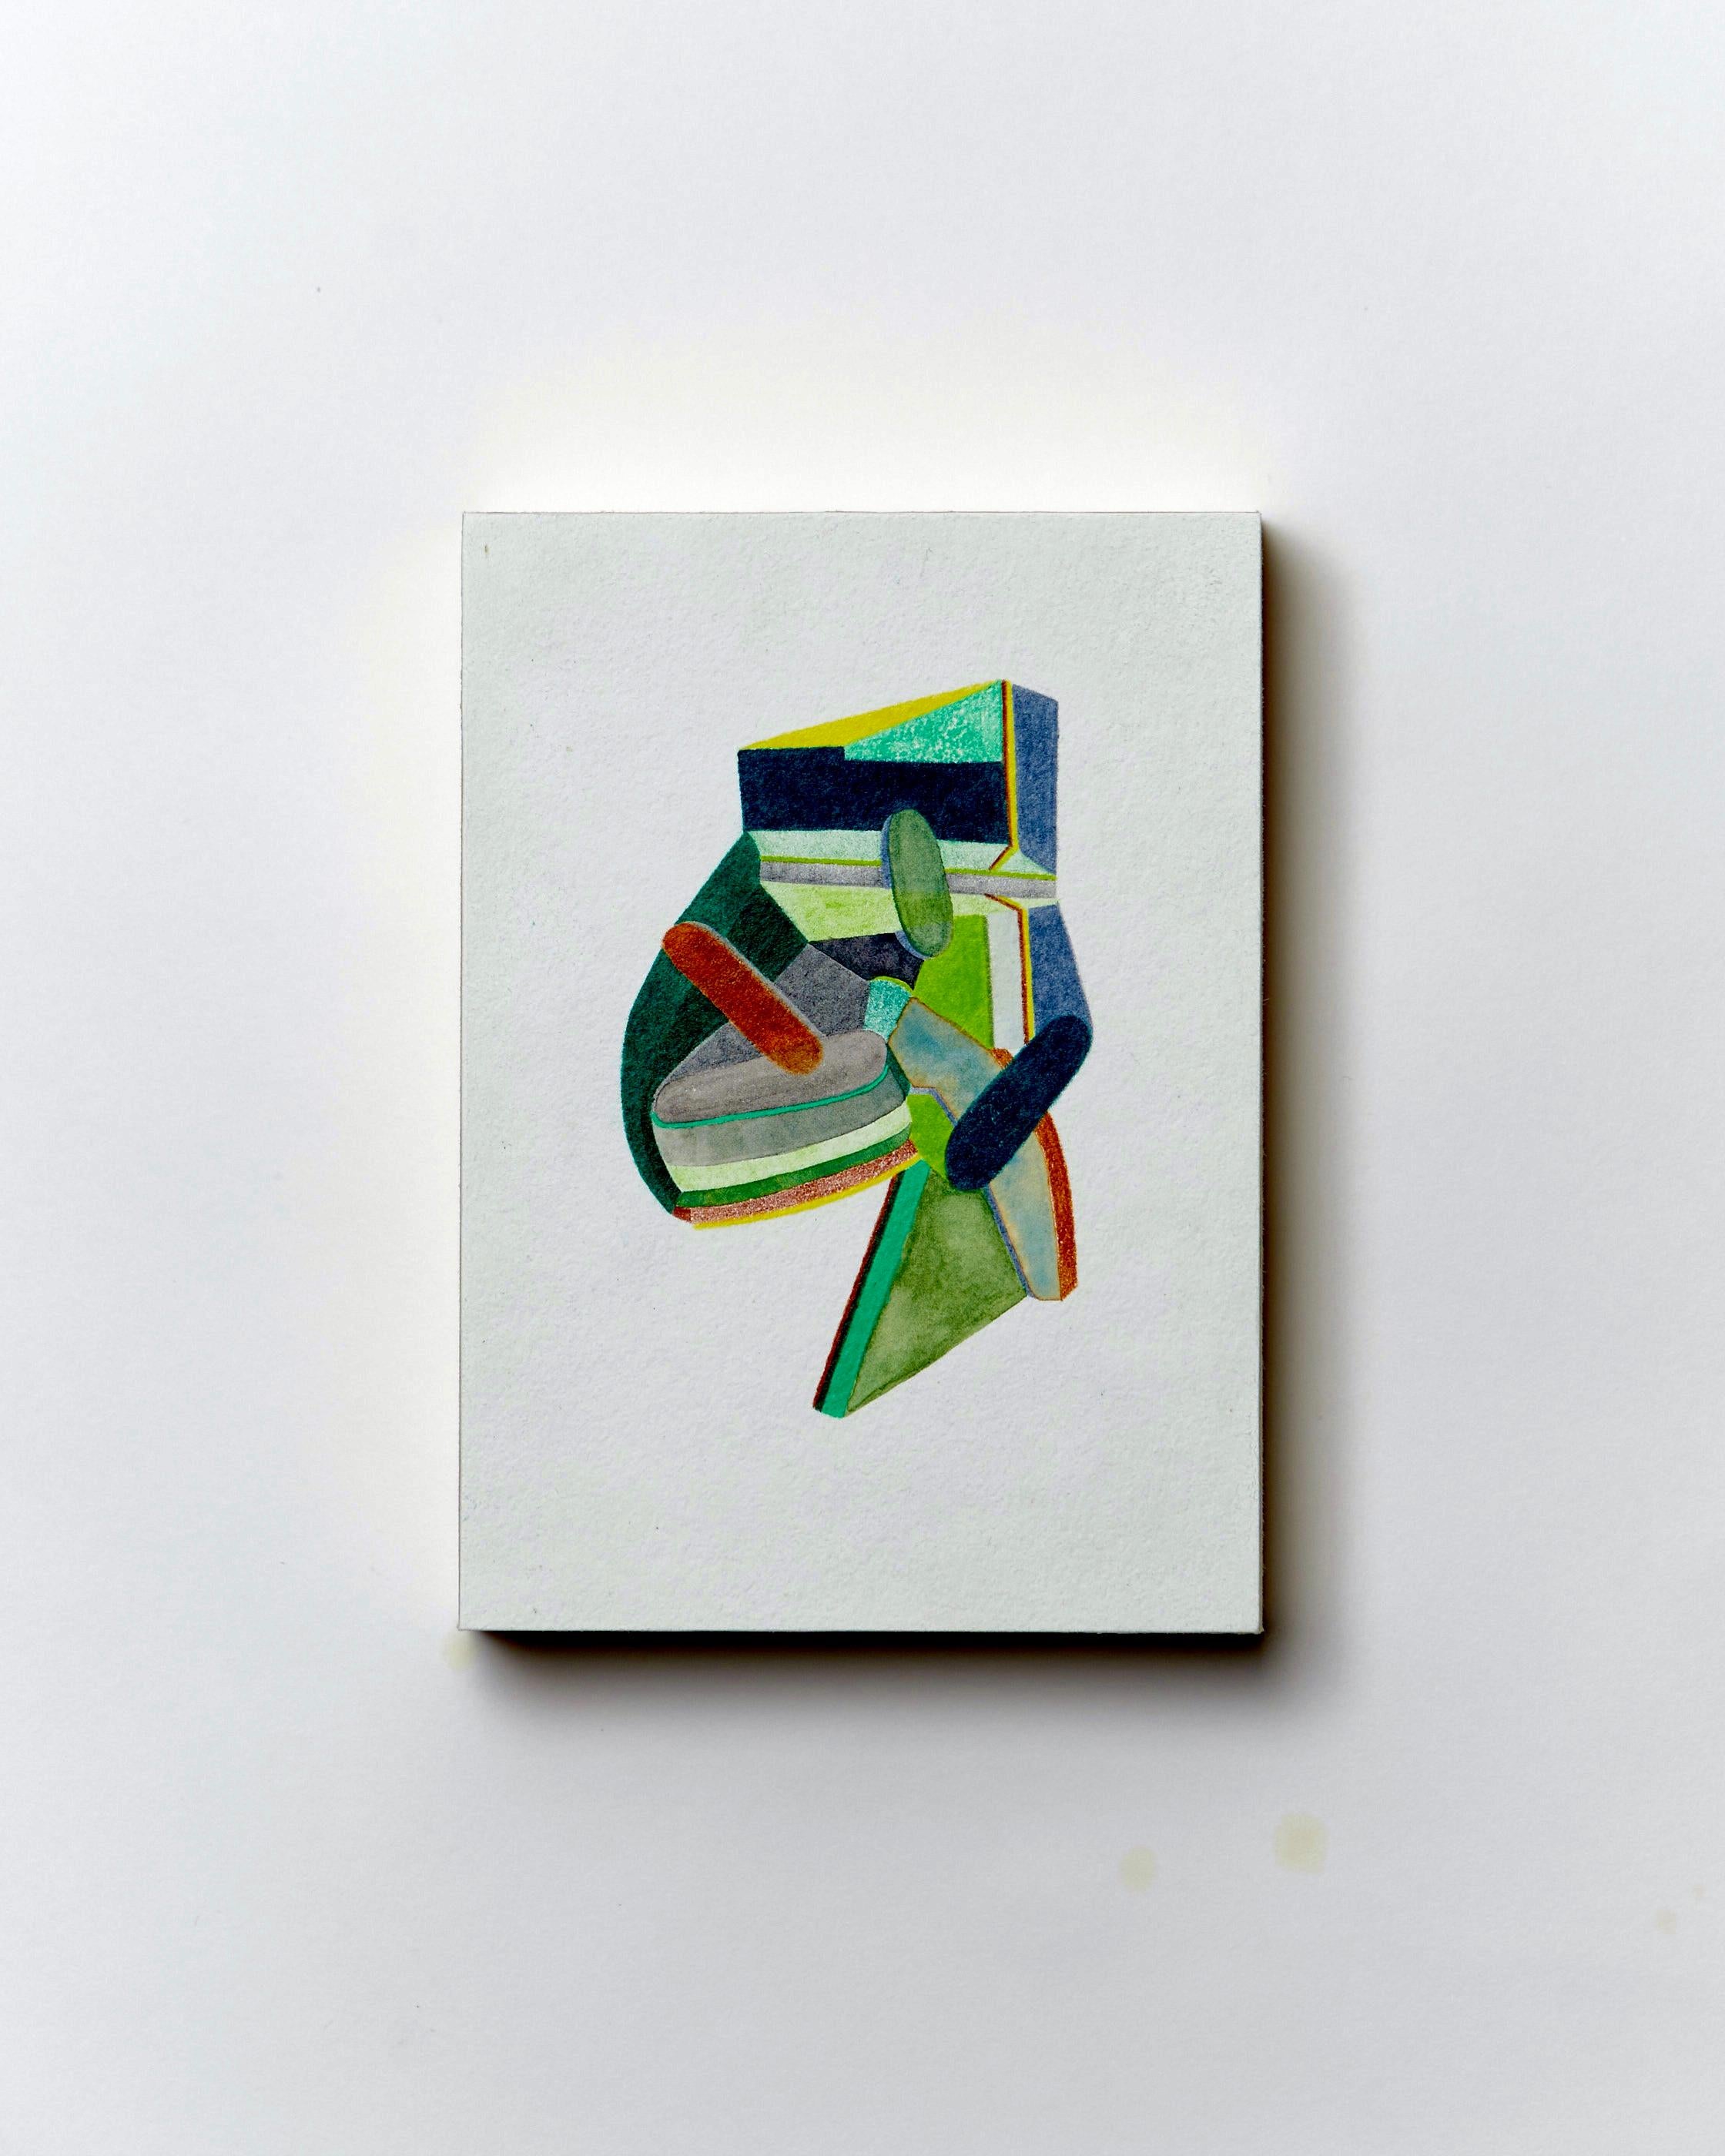 Untitled, Small Works No. 51, green geometric abstraction, work on paper - Art by Sasha Hallock